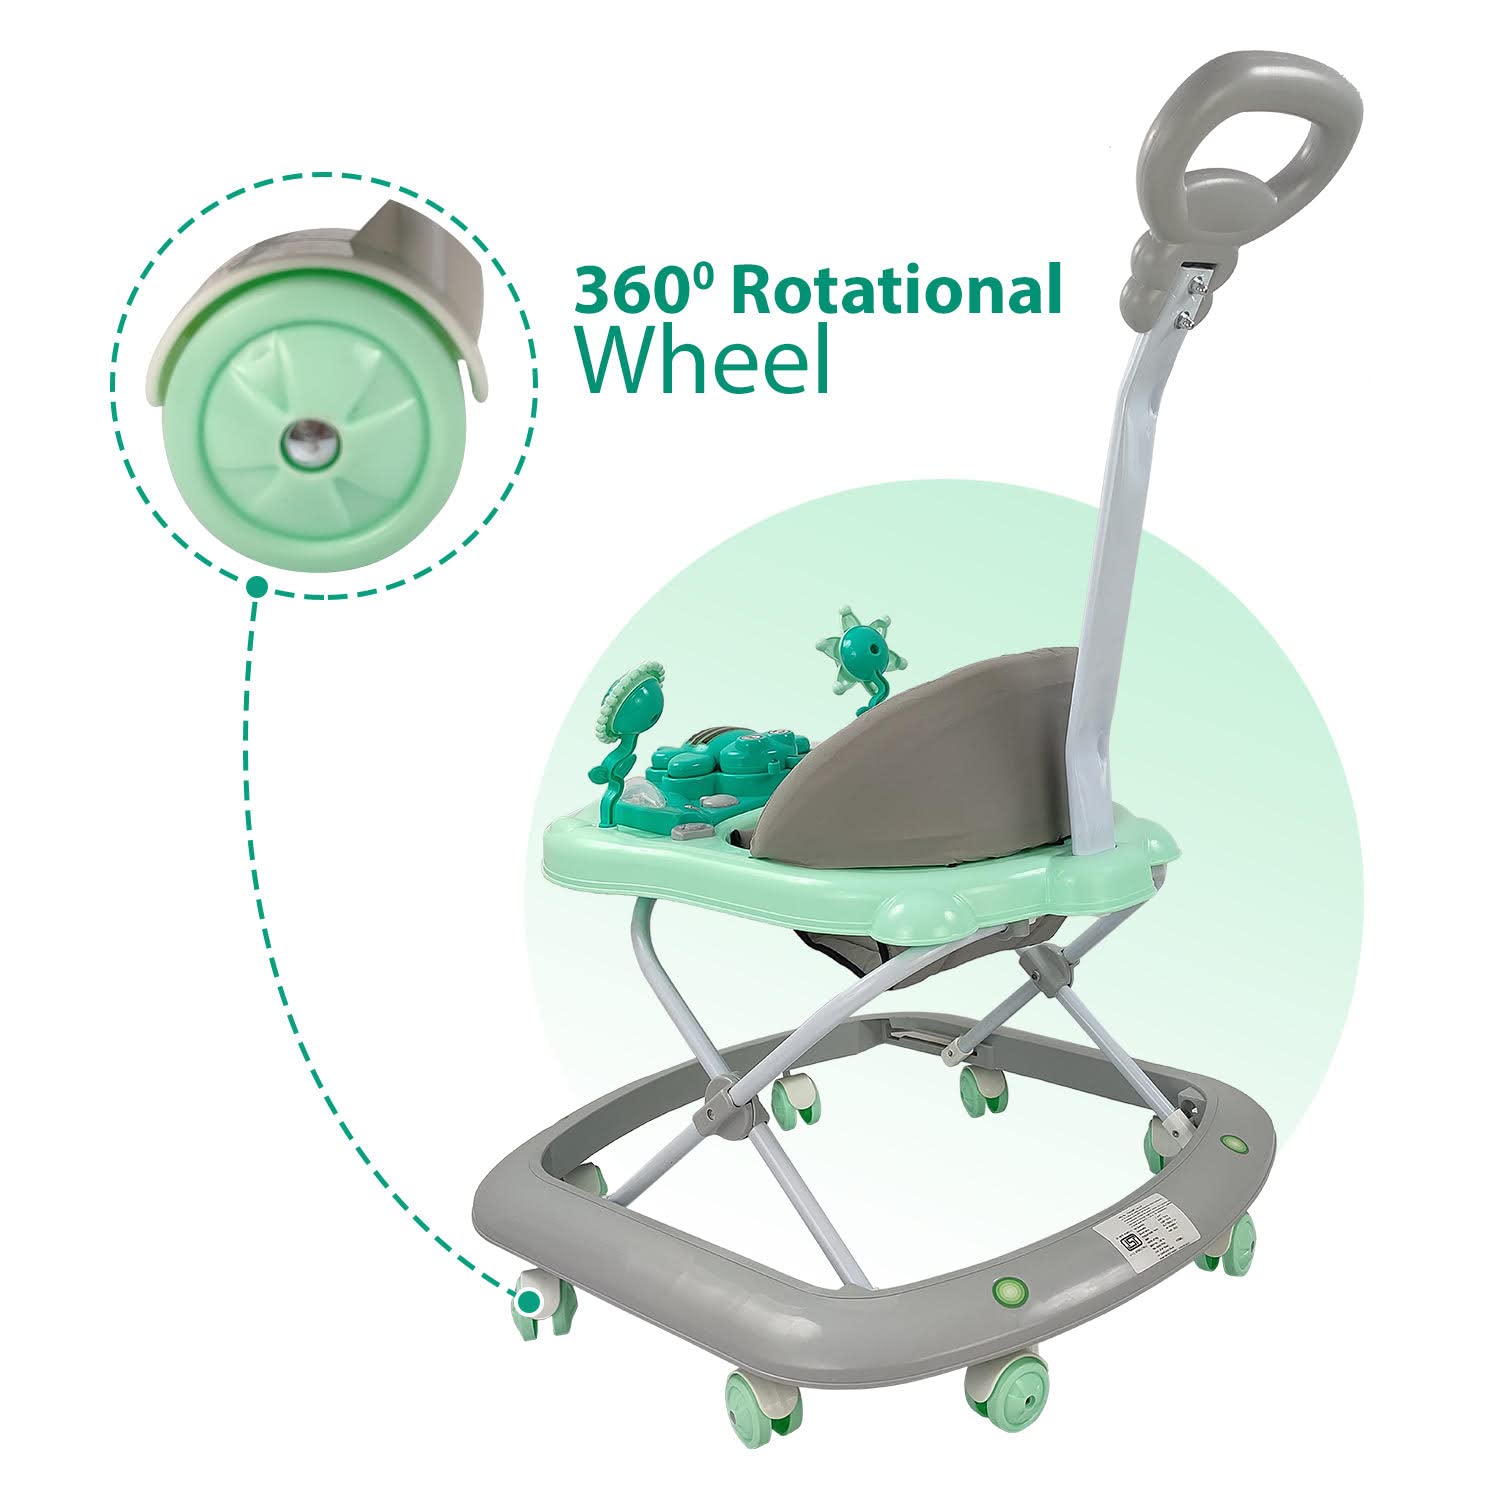 Butterfly Deluxe Baby Walker with 3 Position Adjustable Height Music & Light & Parental Handle, Foldable Activity Walker, Baby 6-18 Months boy, Walker for Kids (Capacity 20kg | Green)